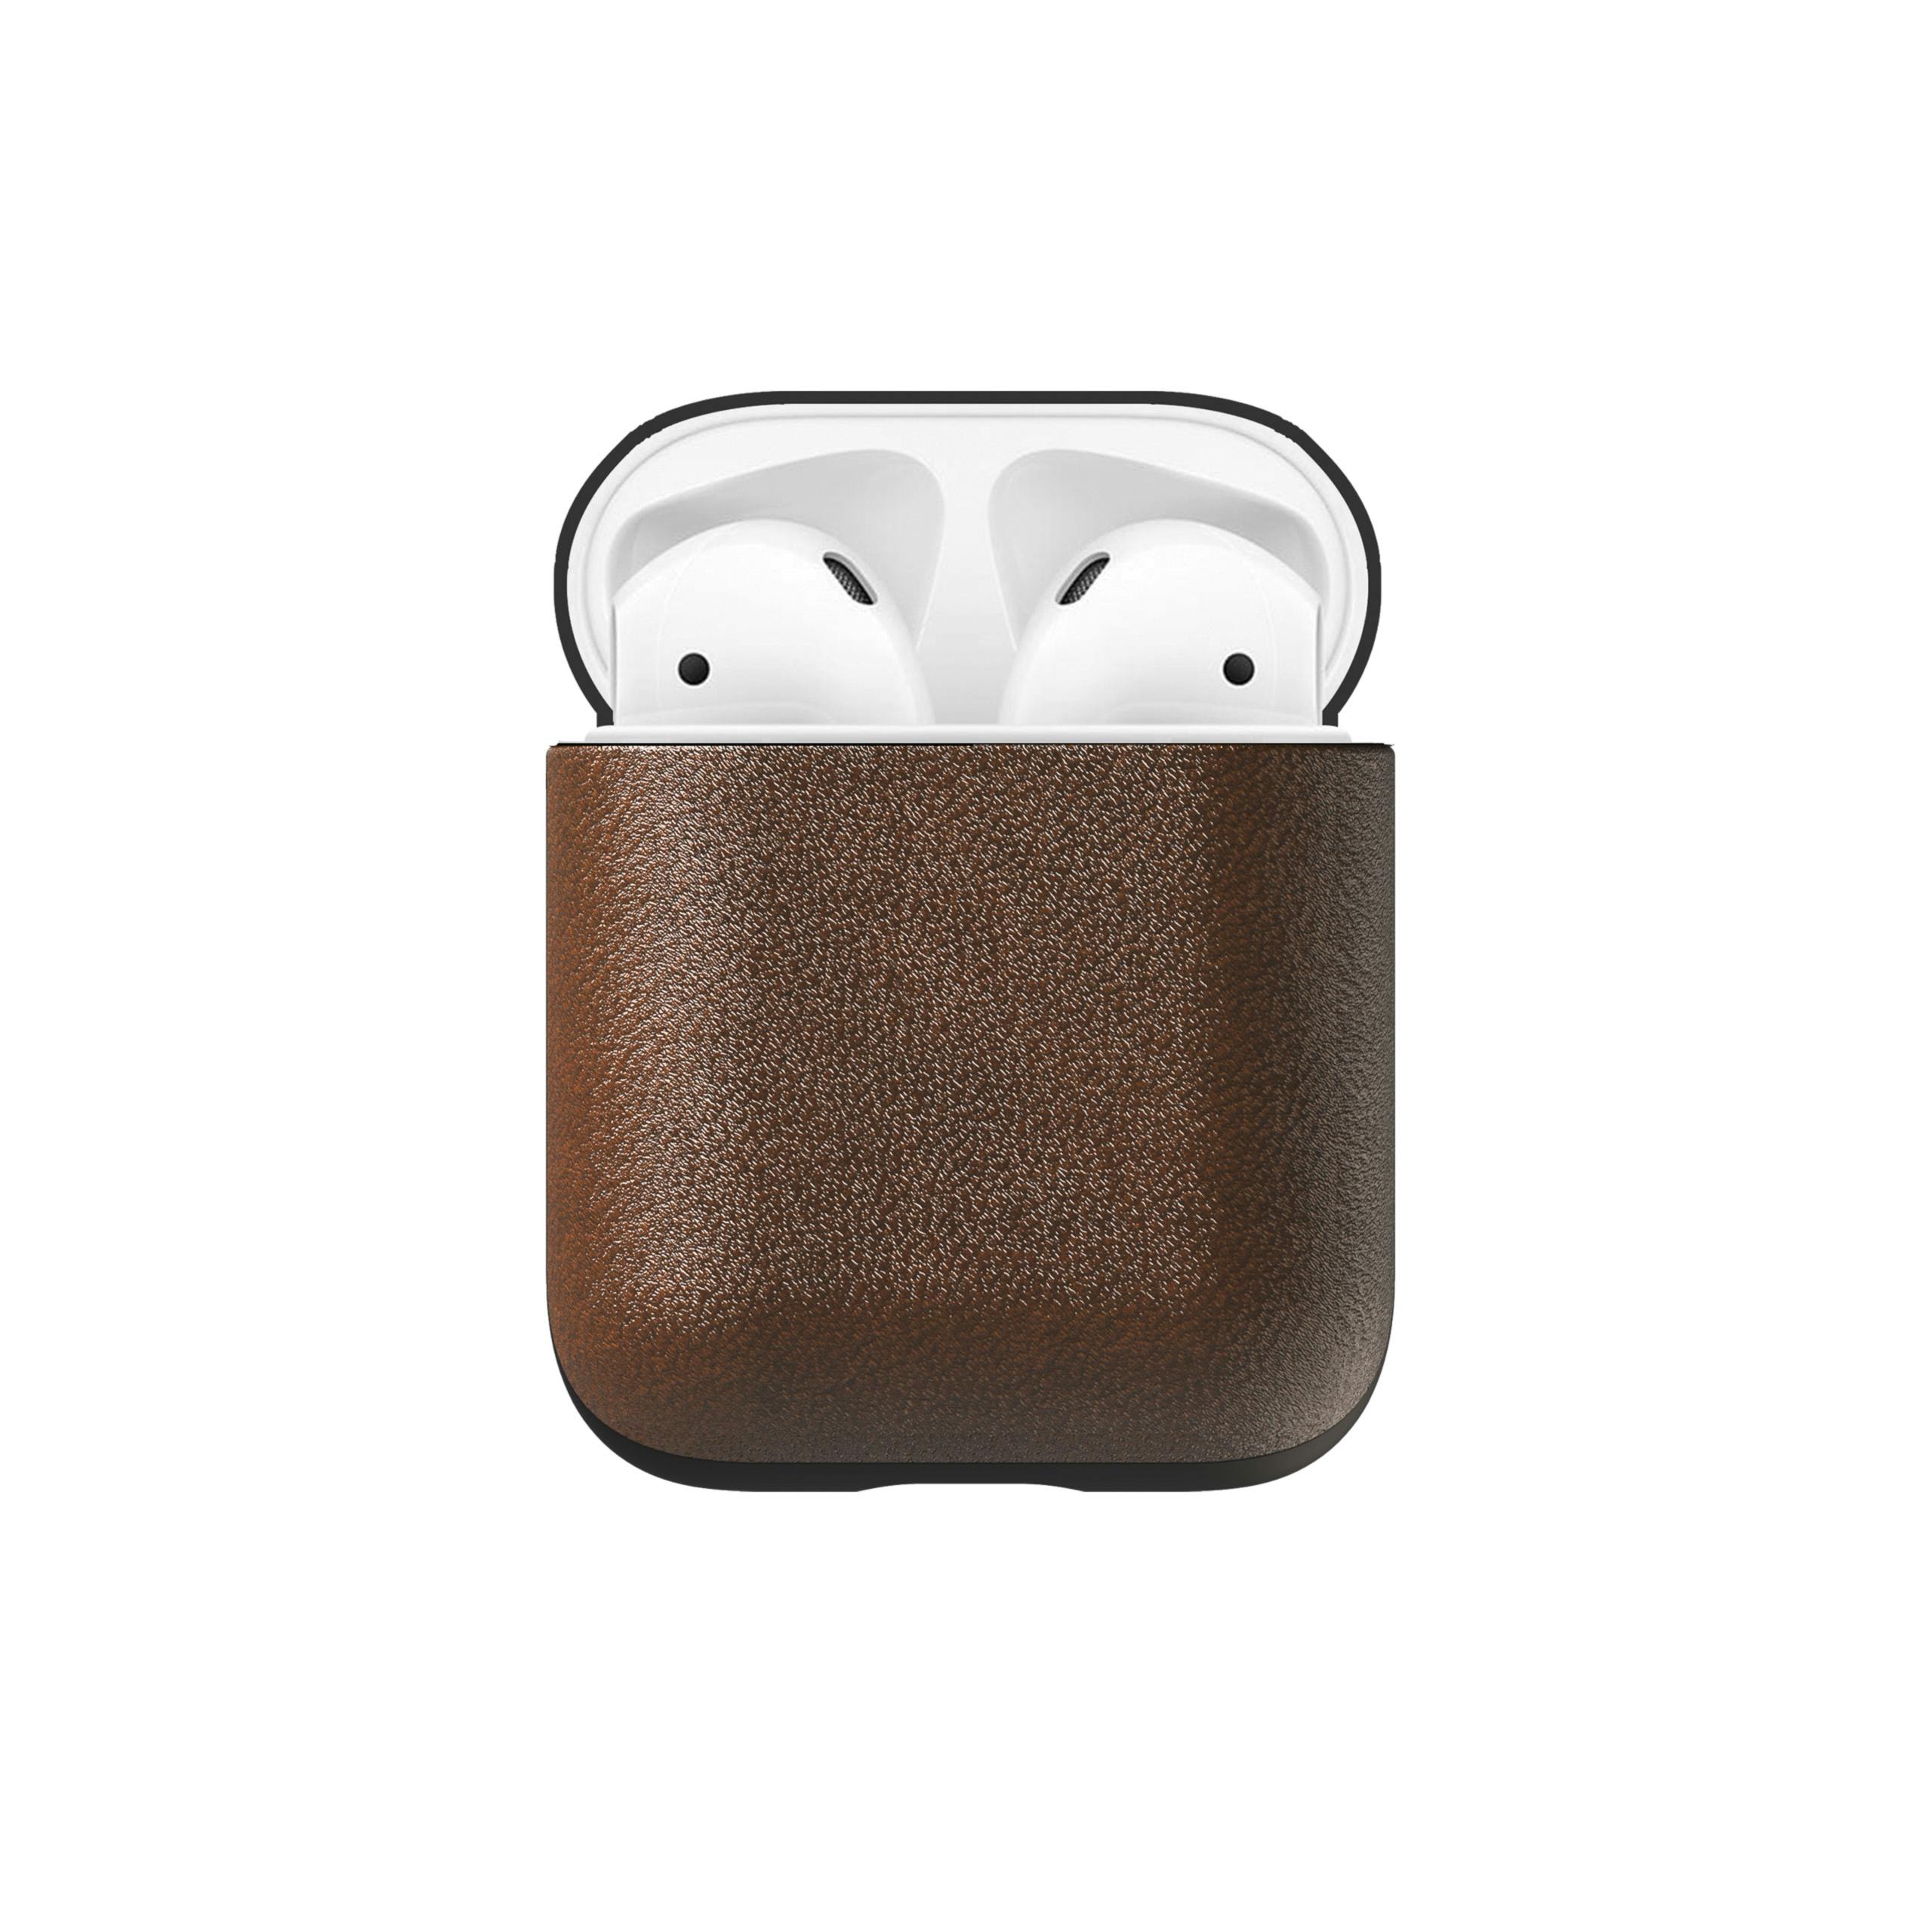 ønskelig Troende Bær Nomad AirPods Case - Rustic Brown Leather | Tech & Audio | Huckberry